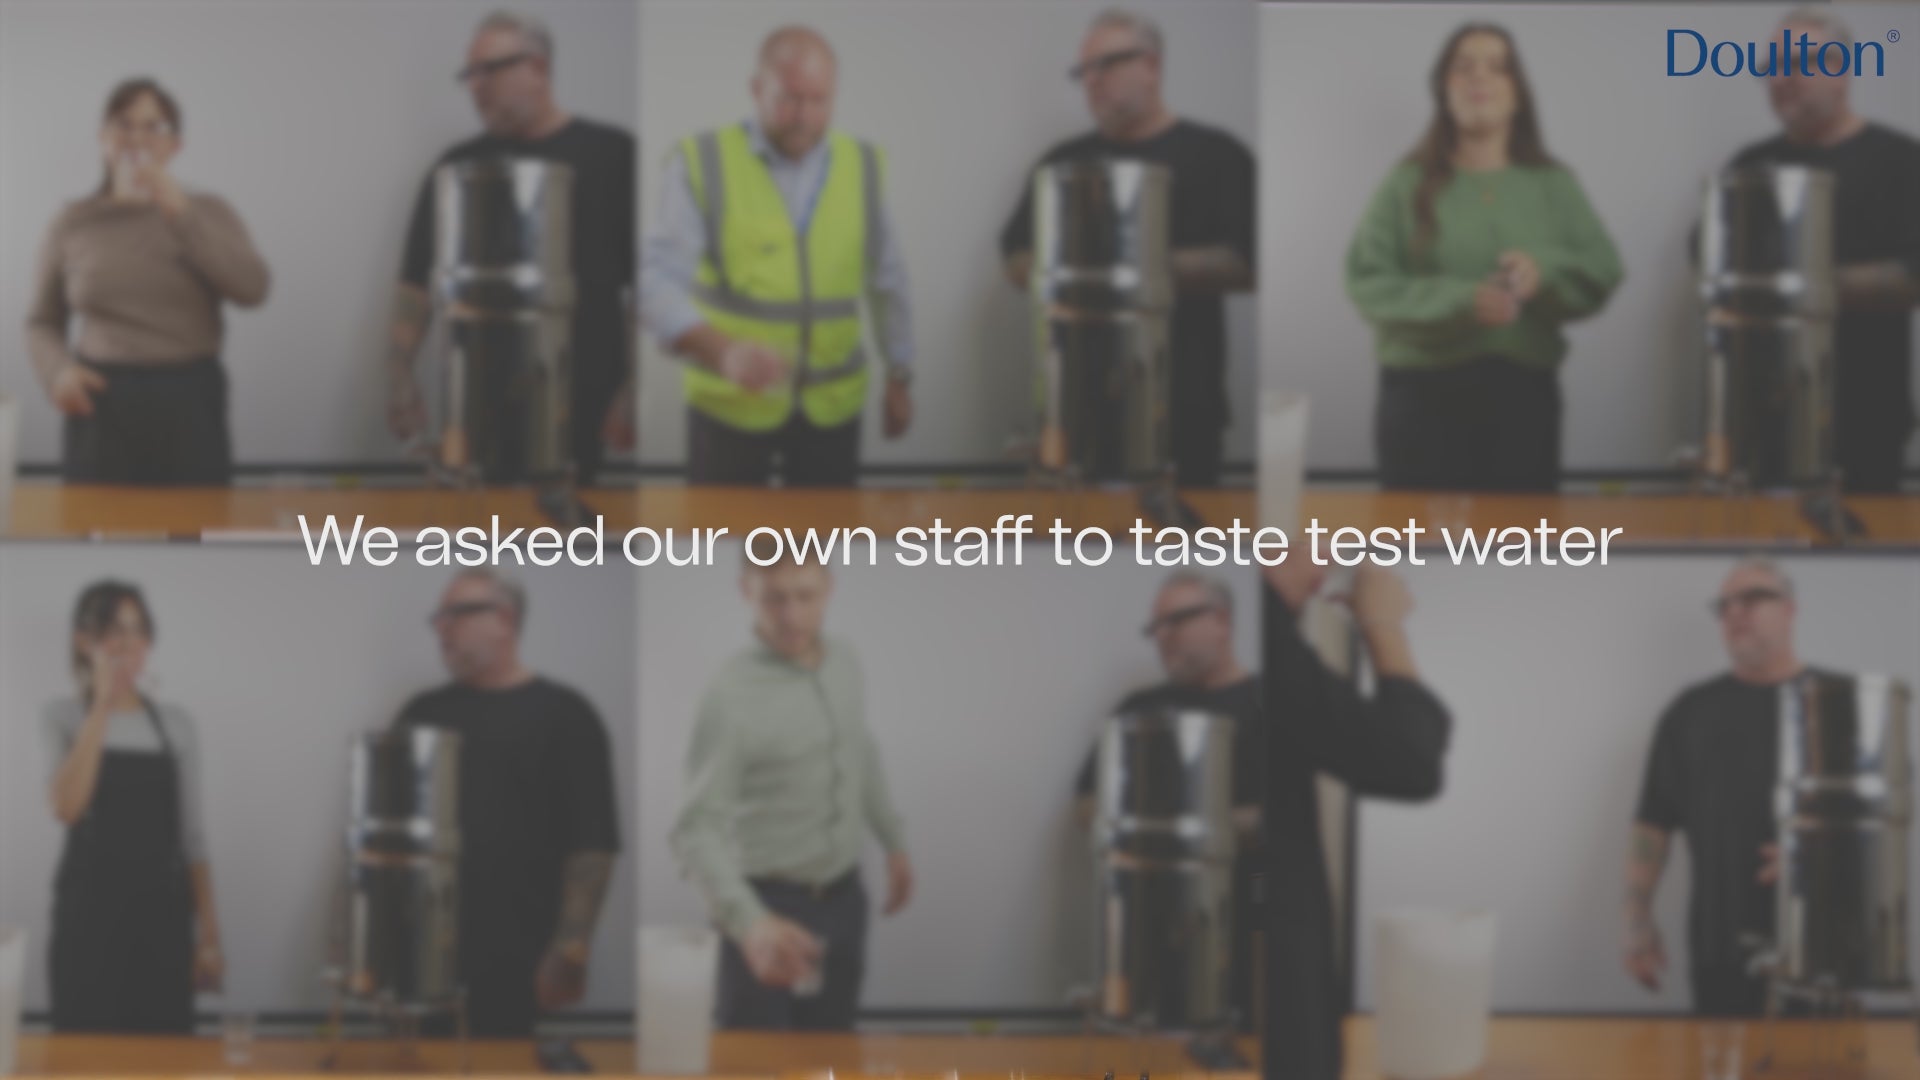 This video was a test for employees to taste the difference between filtered and unfiltered water.